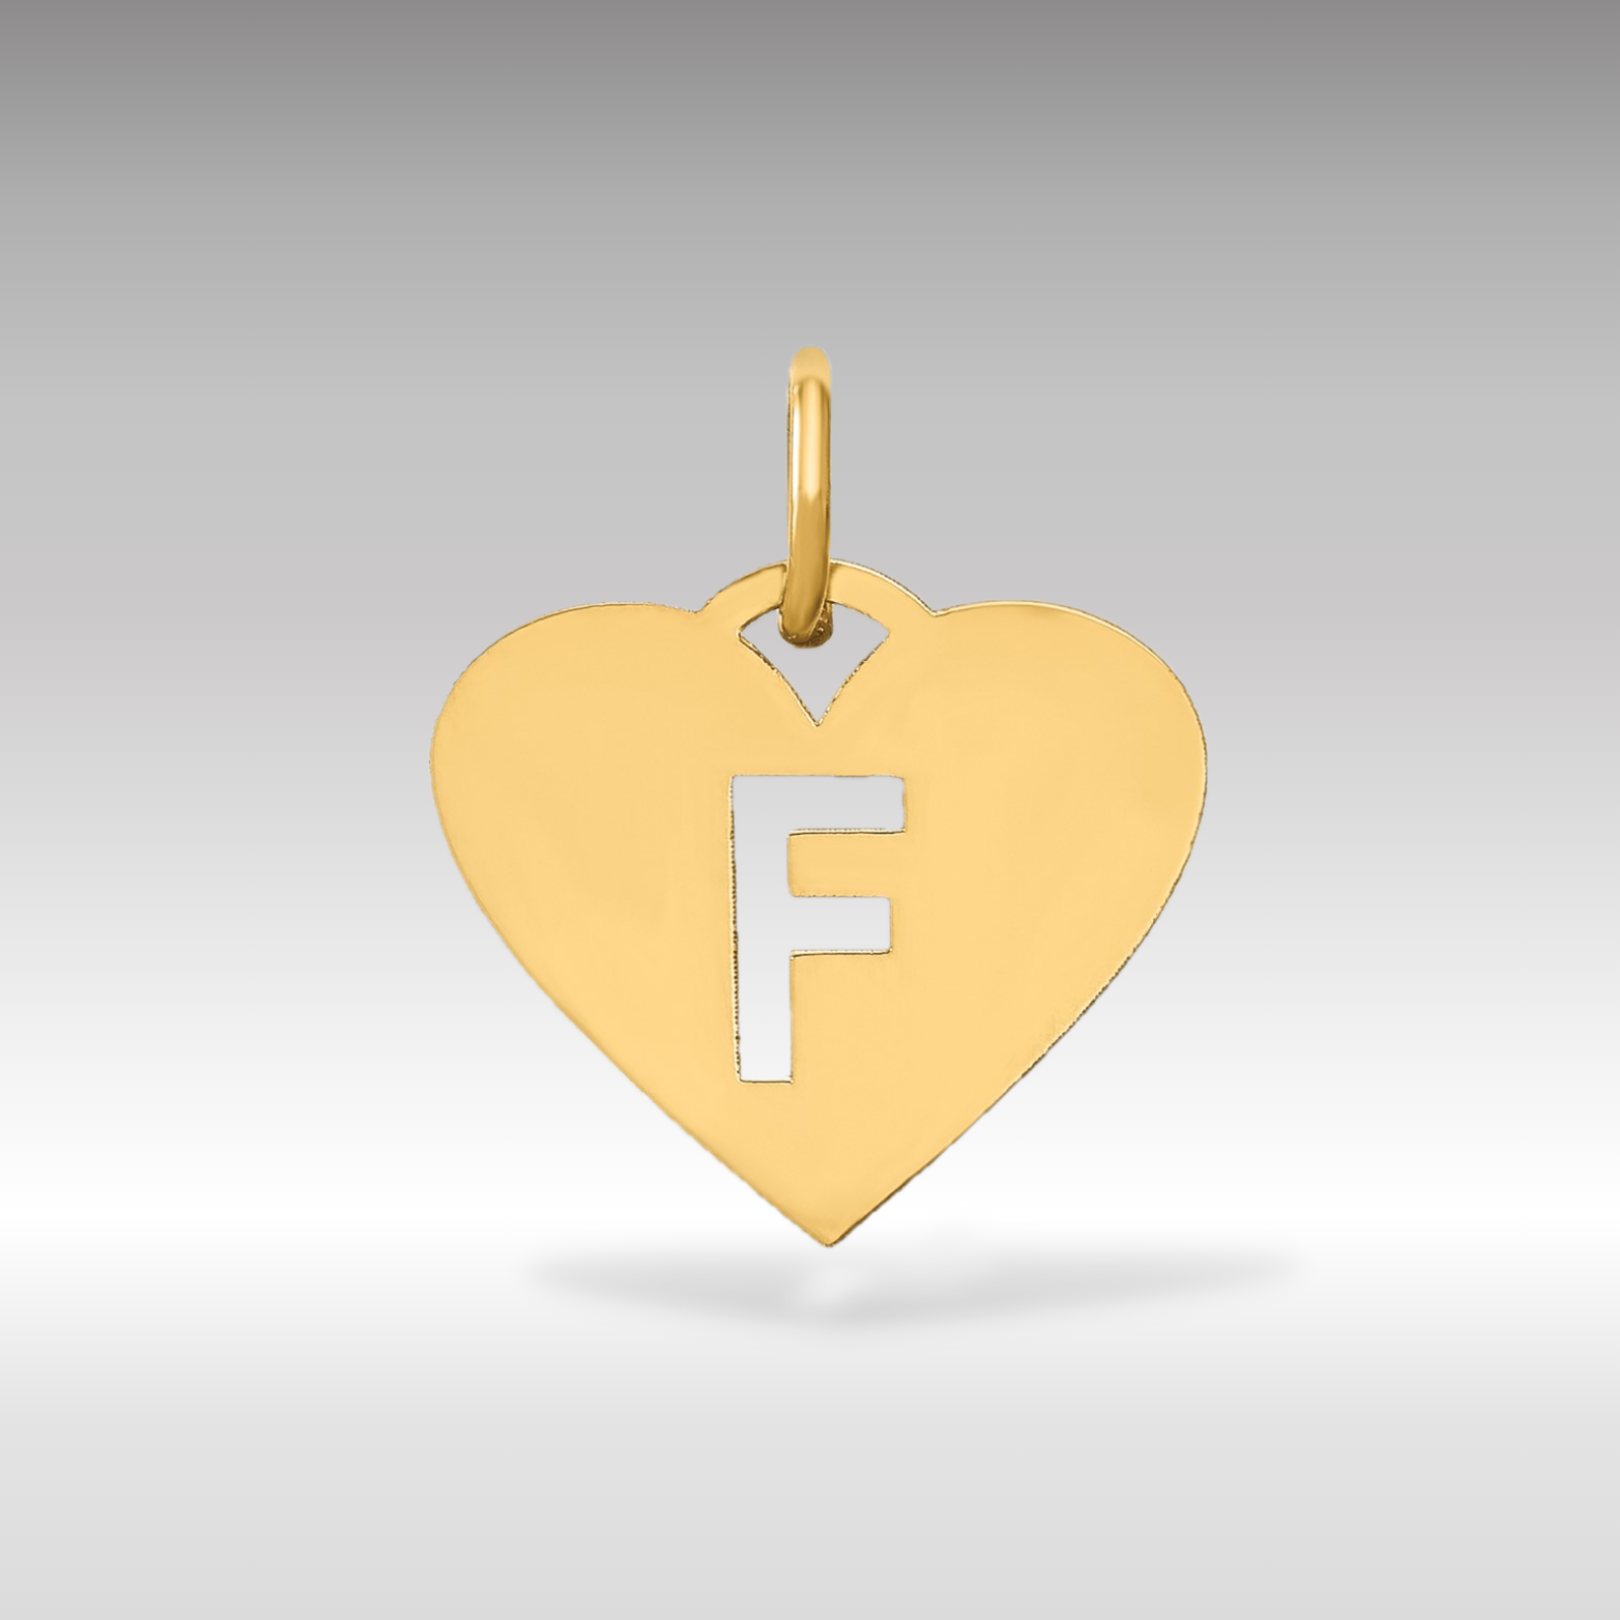 14K Gold Heart Pendant with Letter 'F' - Charlie & Co. Jewelry